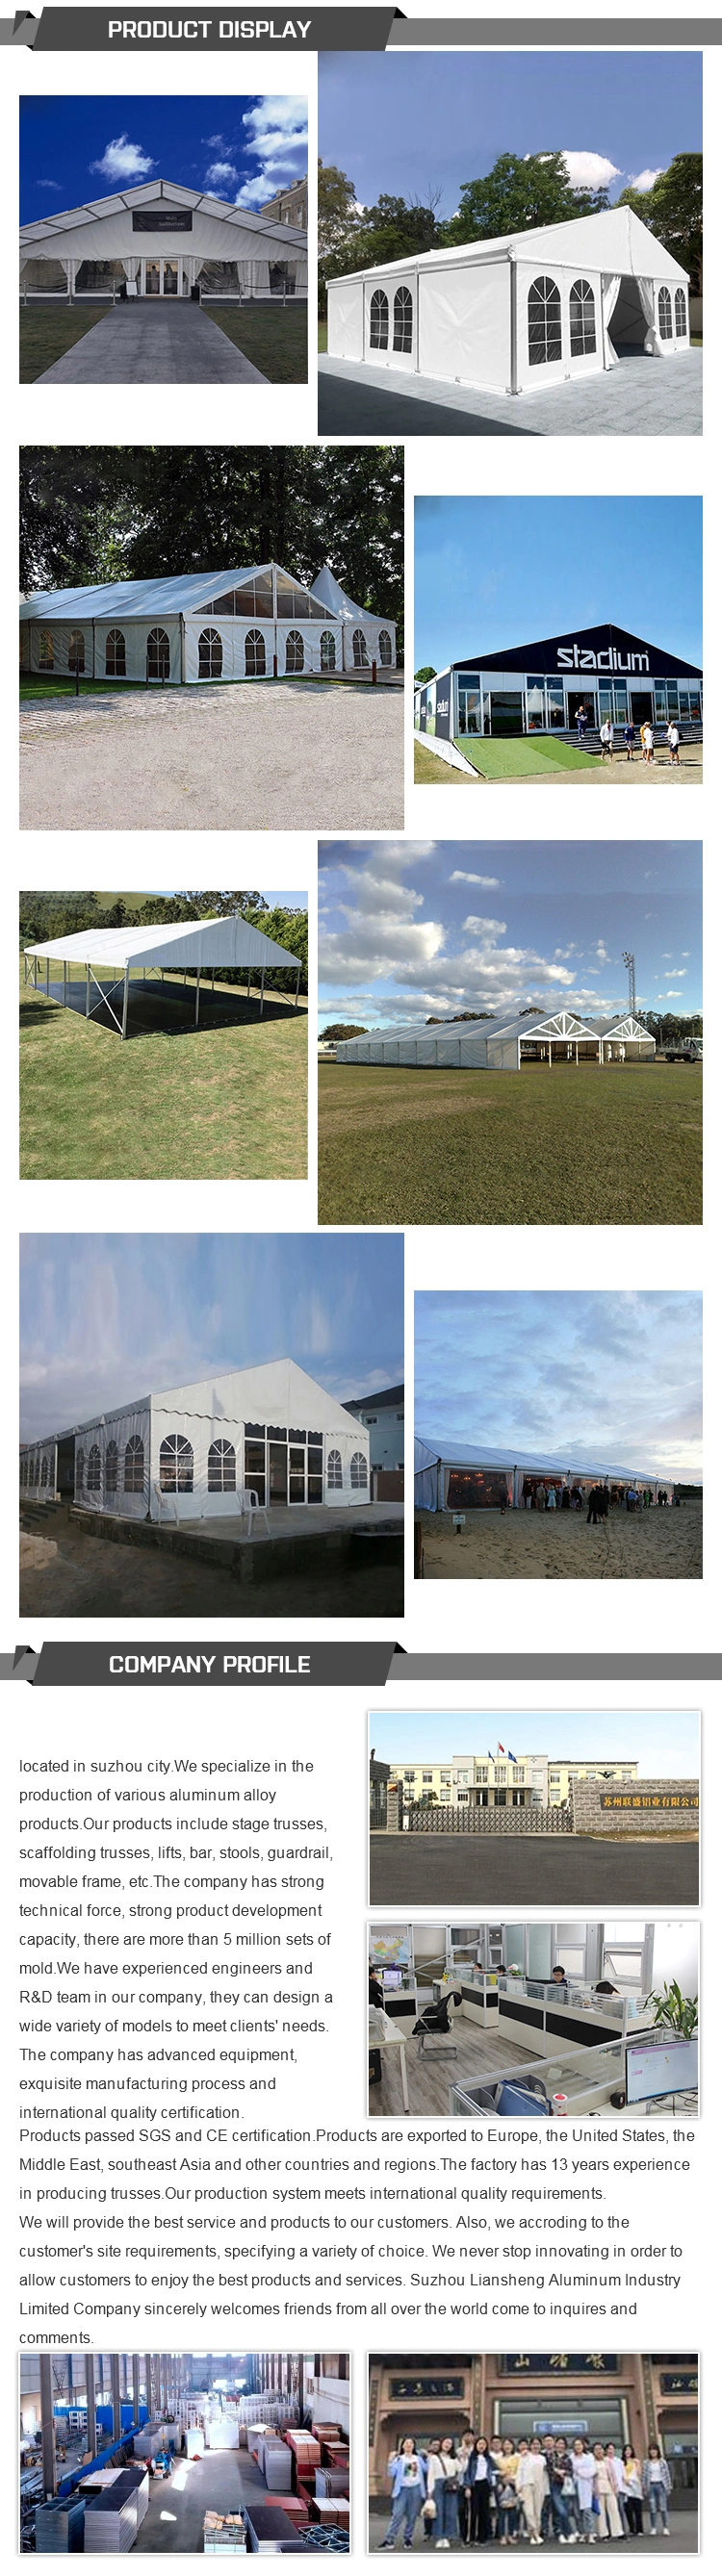 Fob Price: Us $ 20-60 / Square Metermin. Order: 1 Square Metertop Style: Ridge Tentcapacity: 100-2000material: Pvcusage: Party, Traditional, Beach Tent, Adve